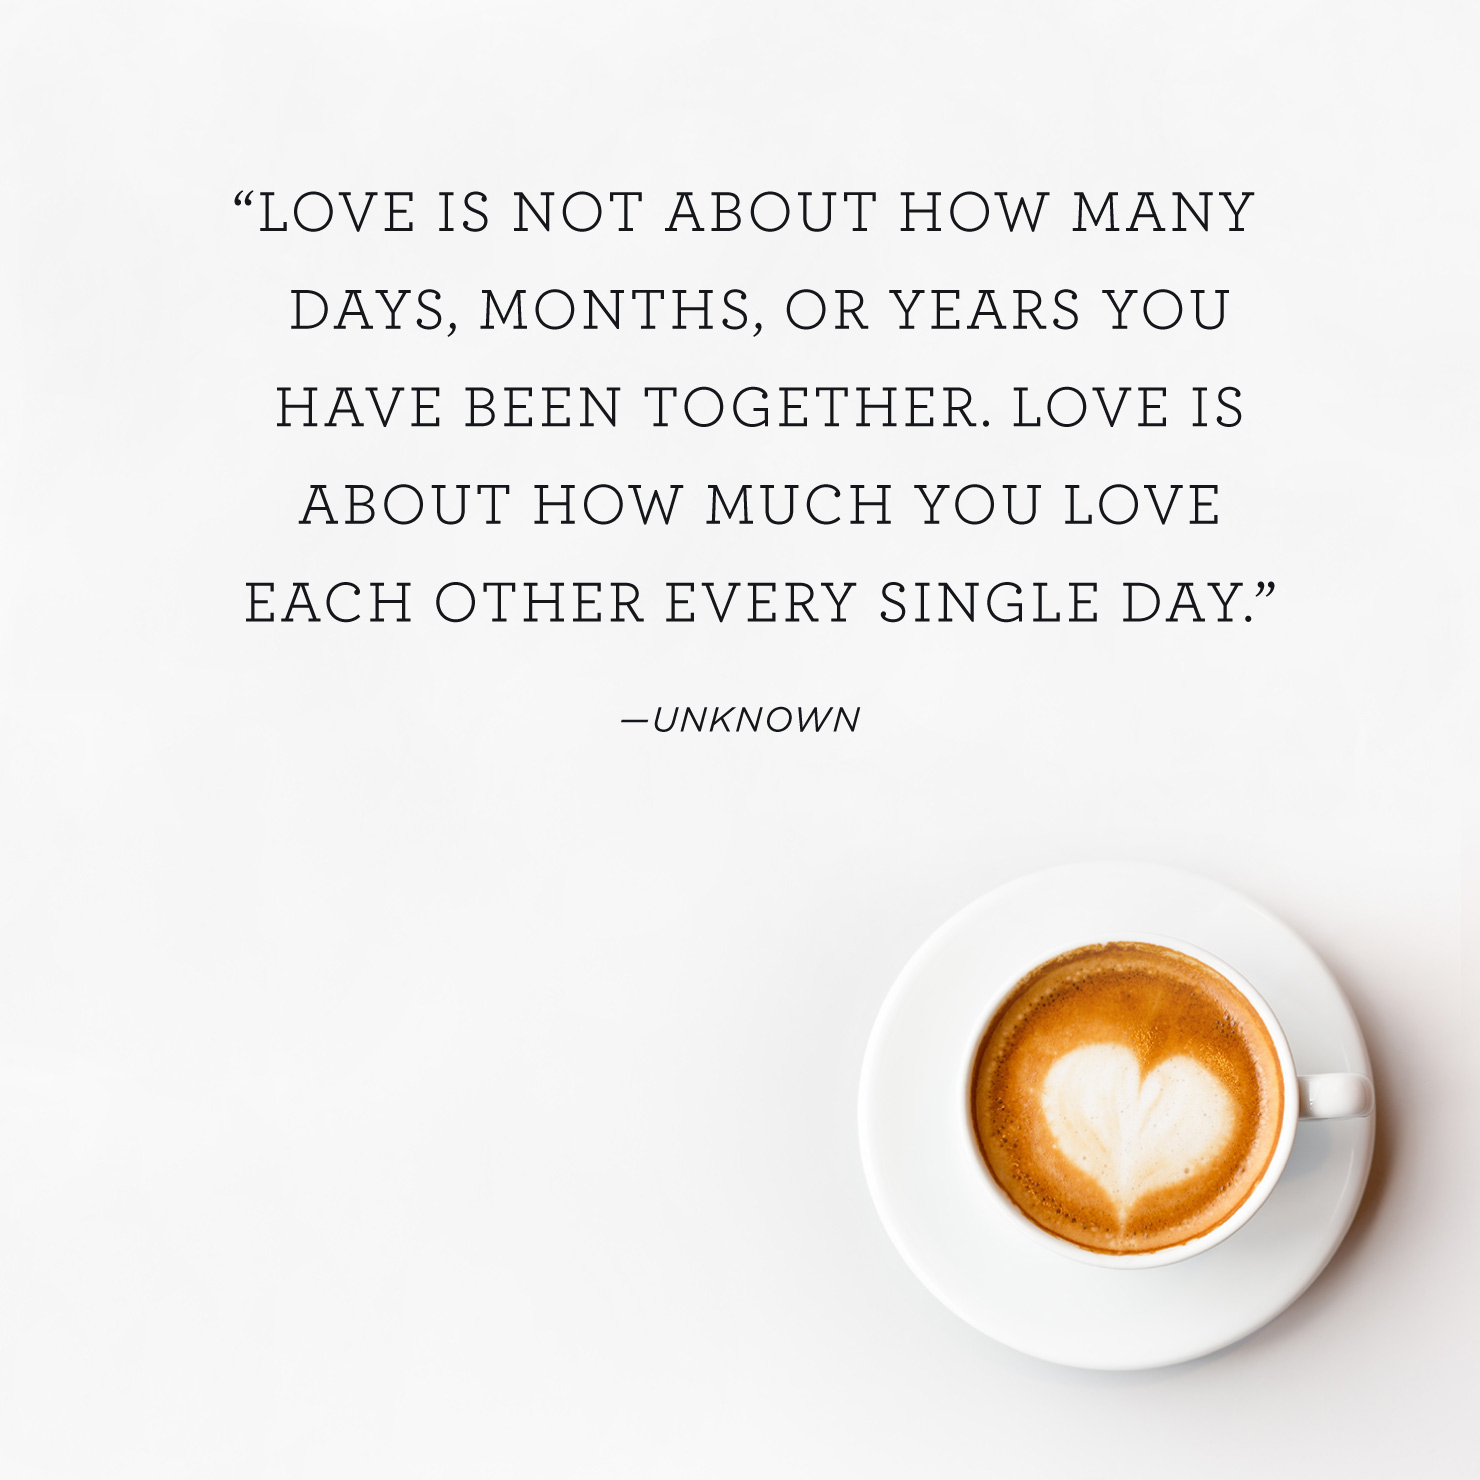 Quote above background image: Love is not about how many days, months, or years you have been together. Love is about how much you love each other every single day. - Unknown